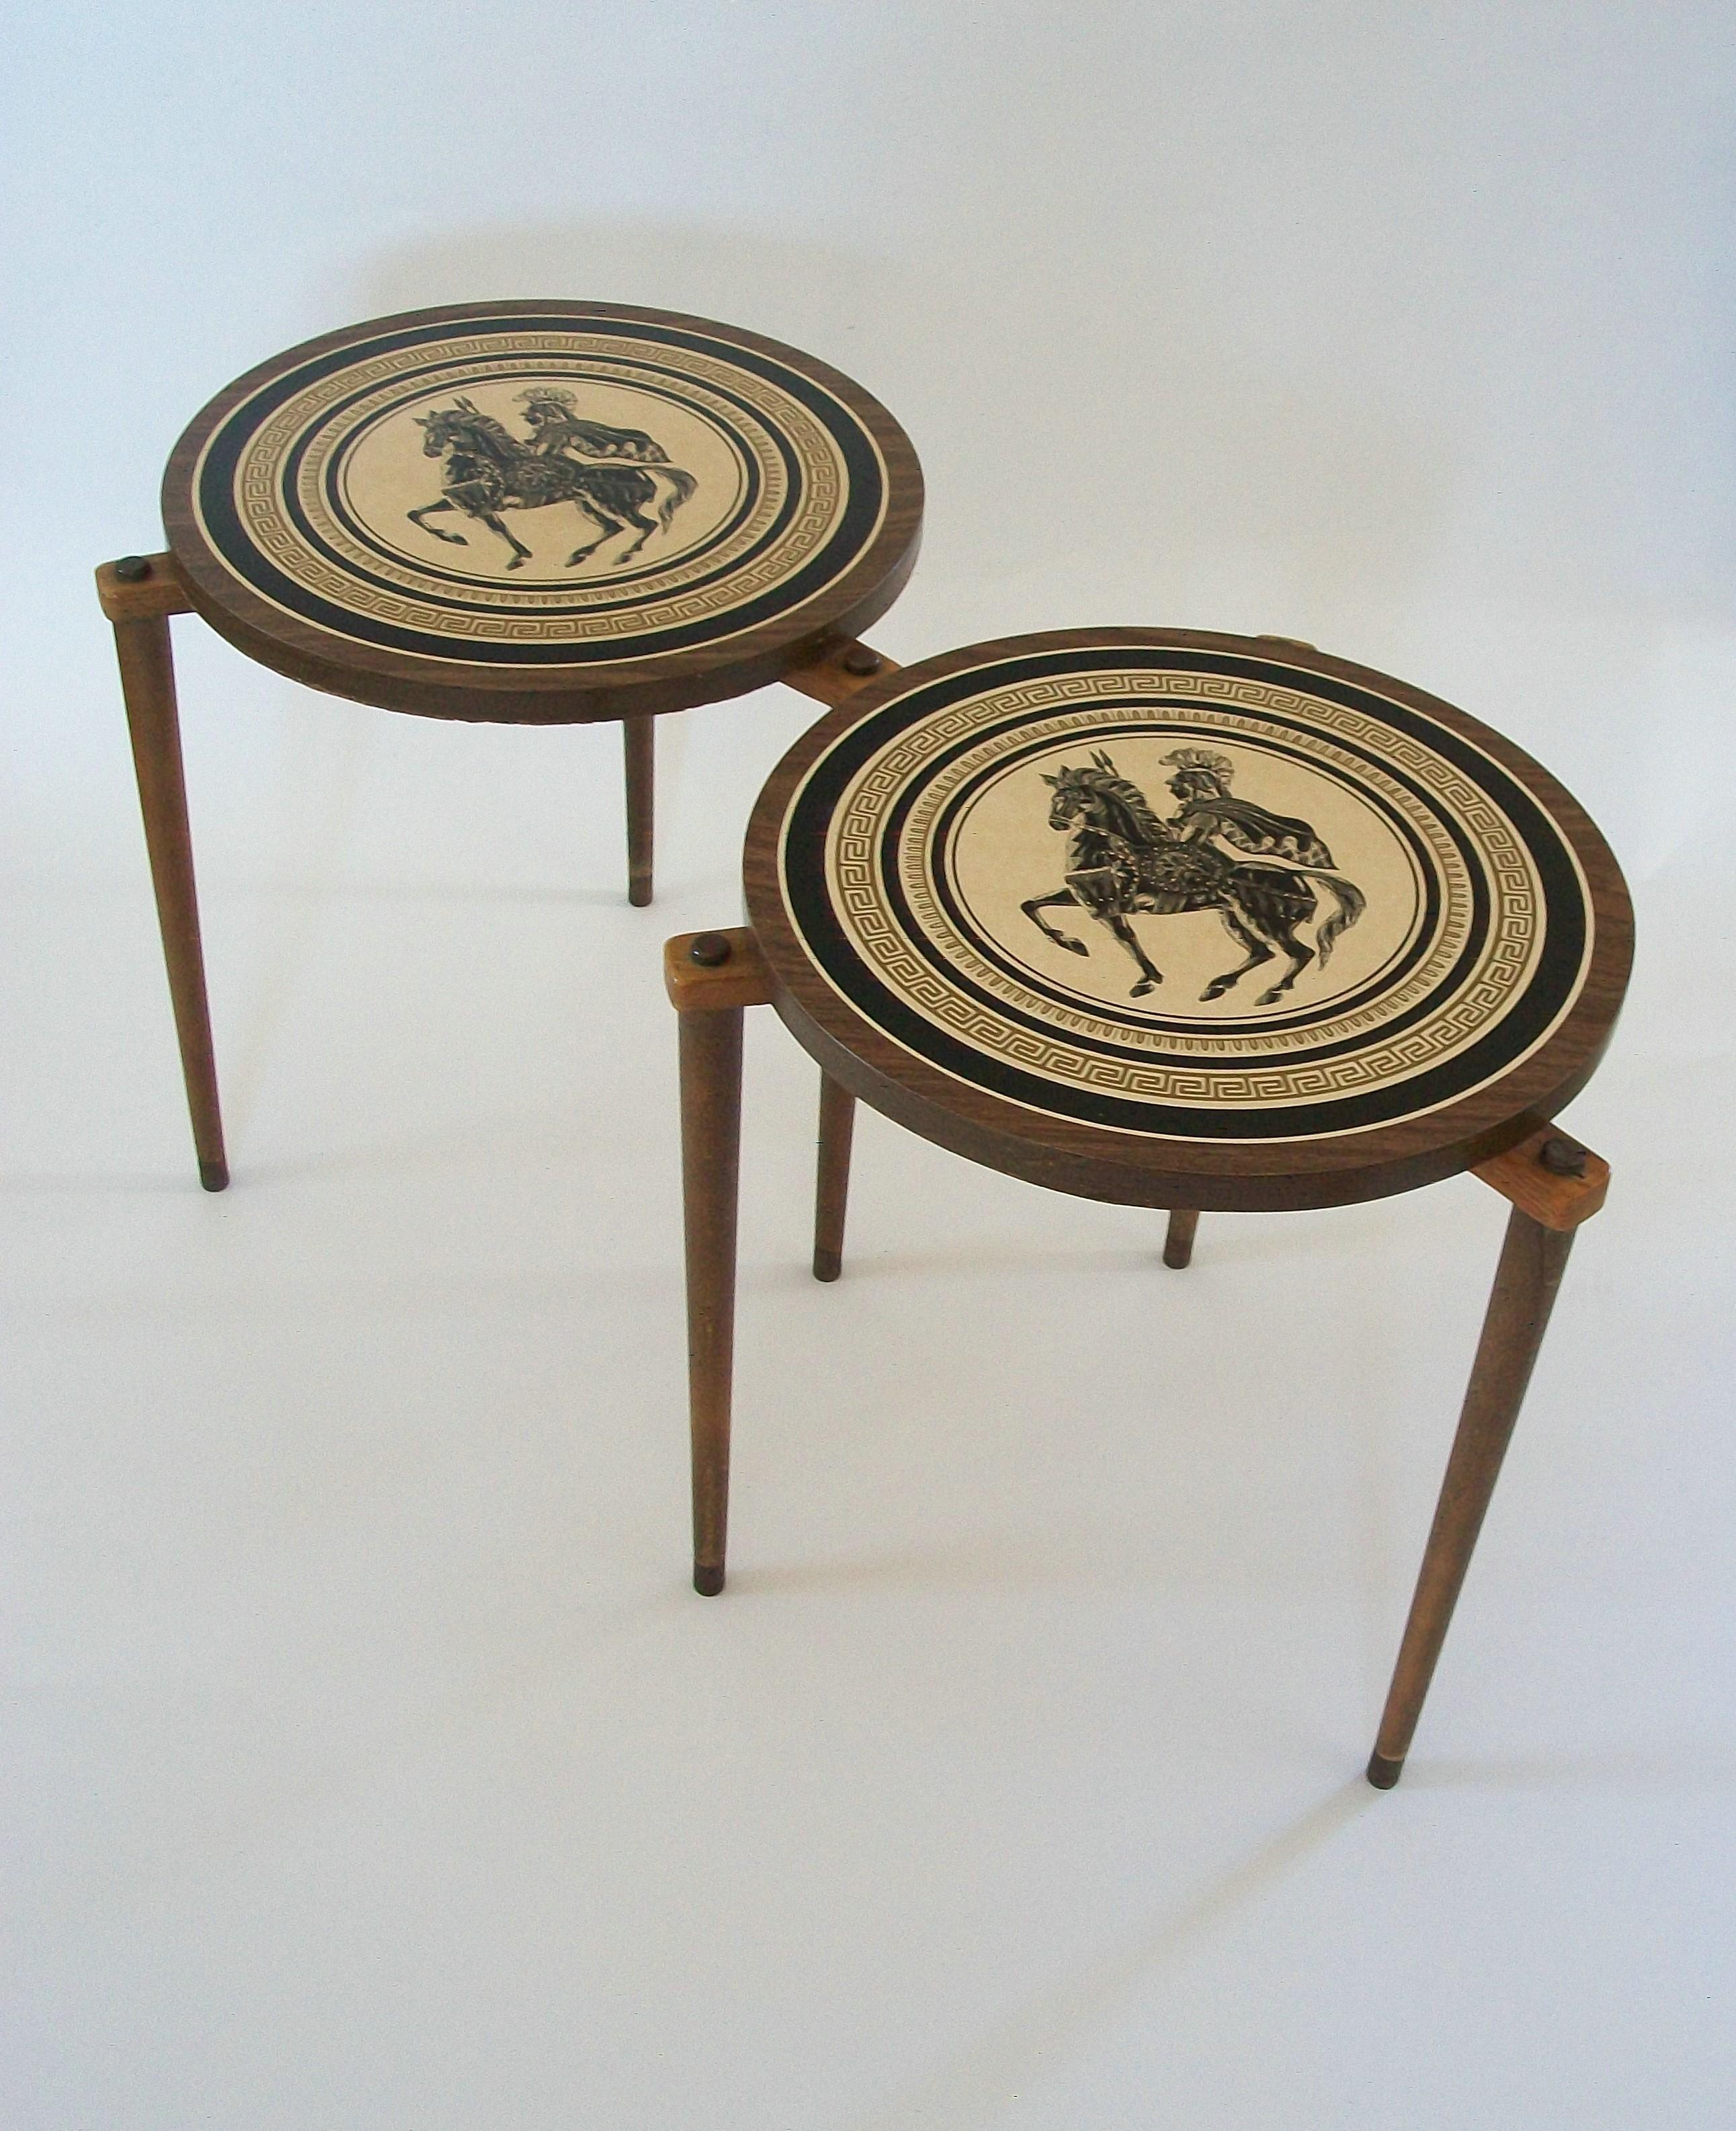 Mid-Century Modern Vintage Pair of Fornasetti Style Stacking Occasional Tables - U.S. - Mid 20th C.